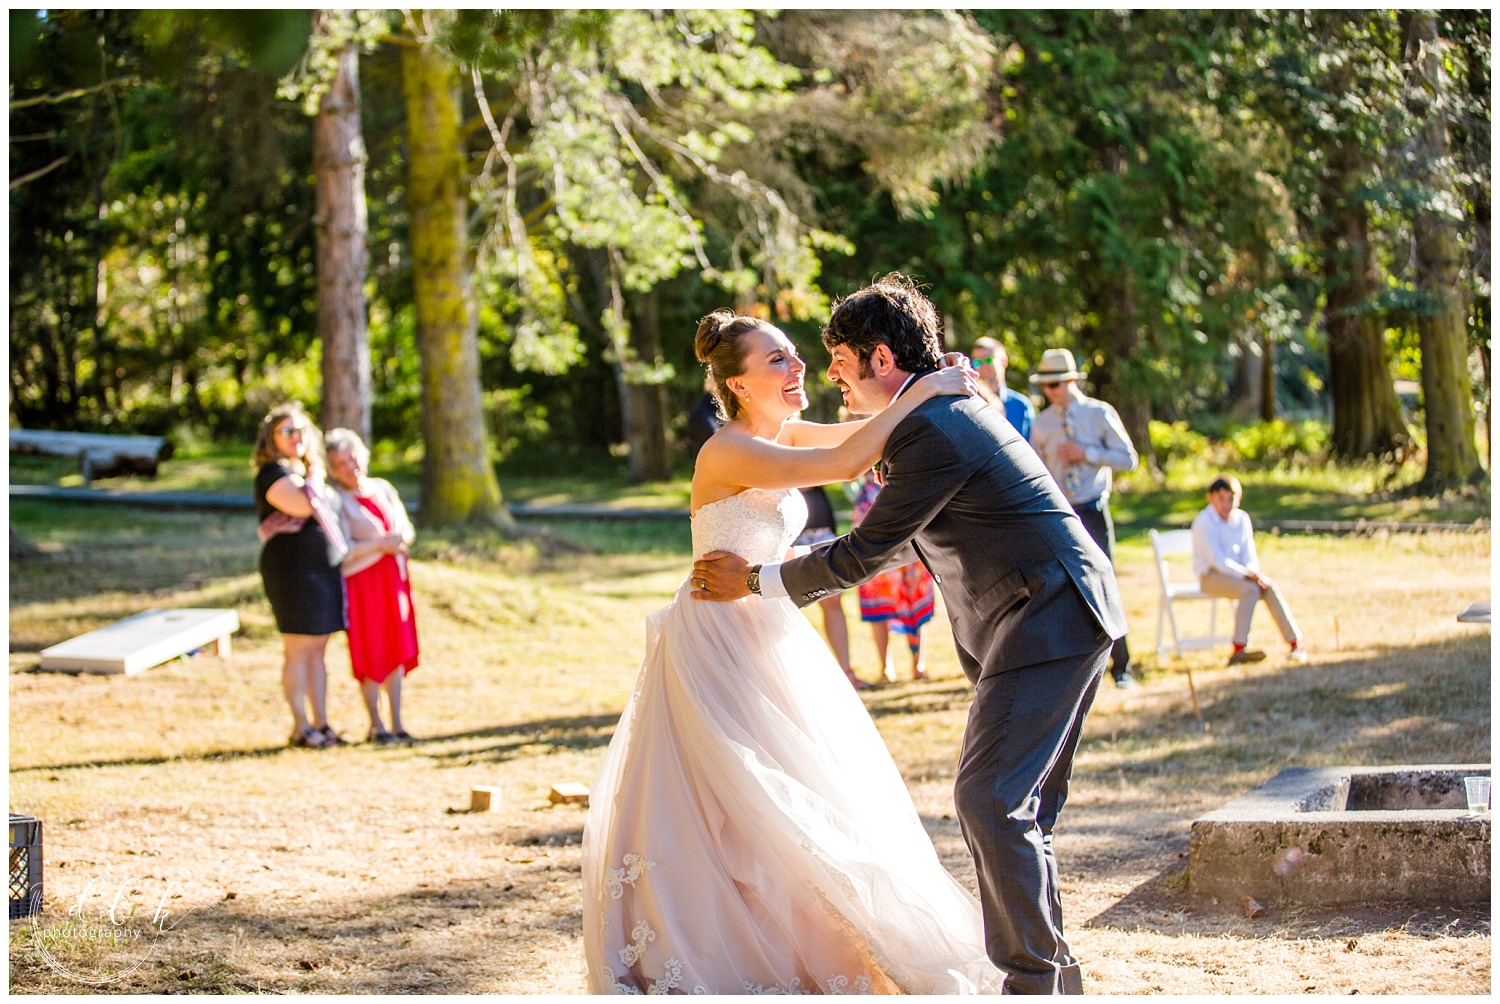 bride and groom get silly during their first dance at wedding in Washington Park, Anacortes